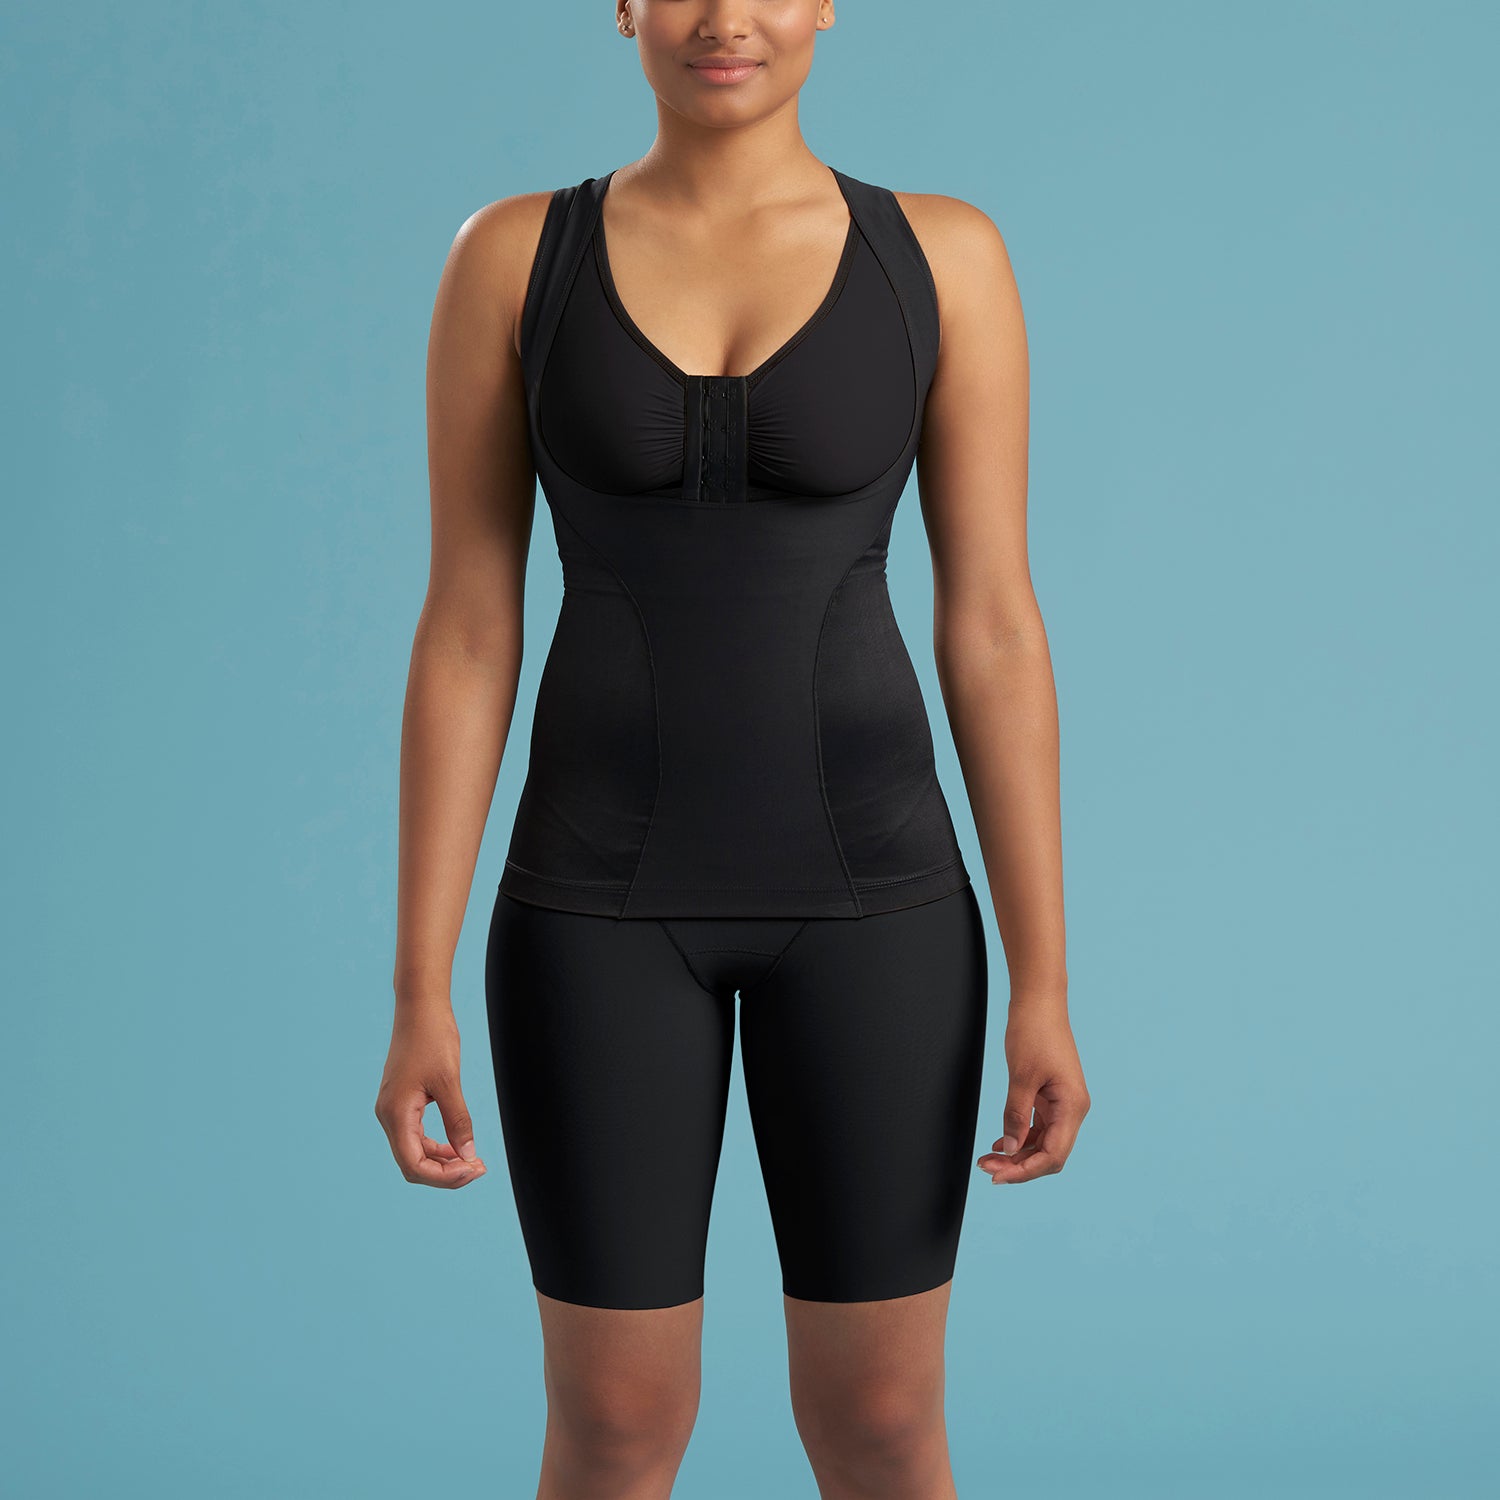 ME-807  Open Bust Compression Camisole Shapewear - The Marena Group, LLC